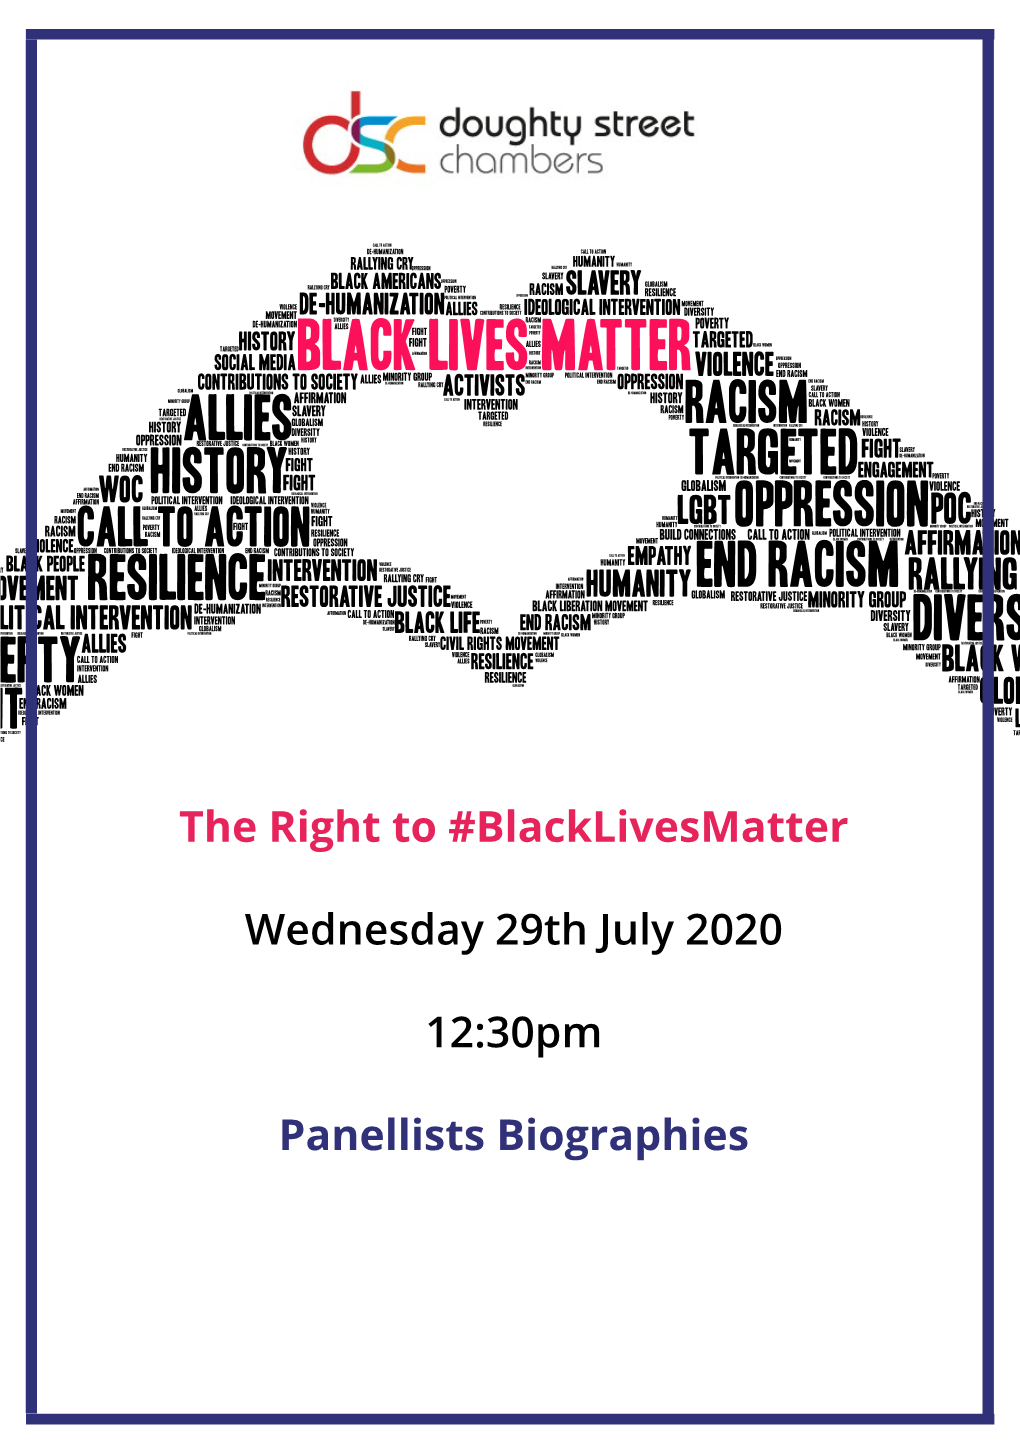 The Right to #Blacklivesmatter